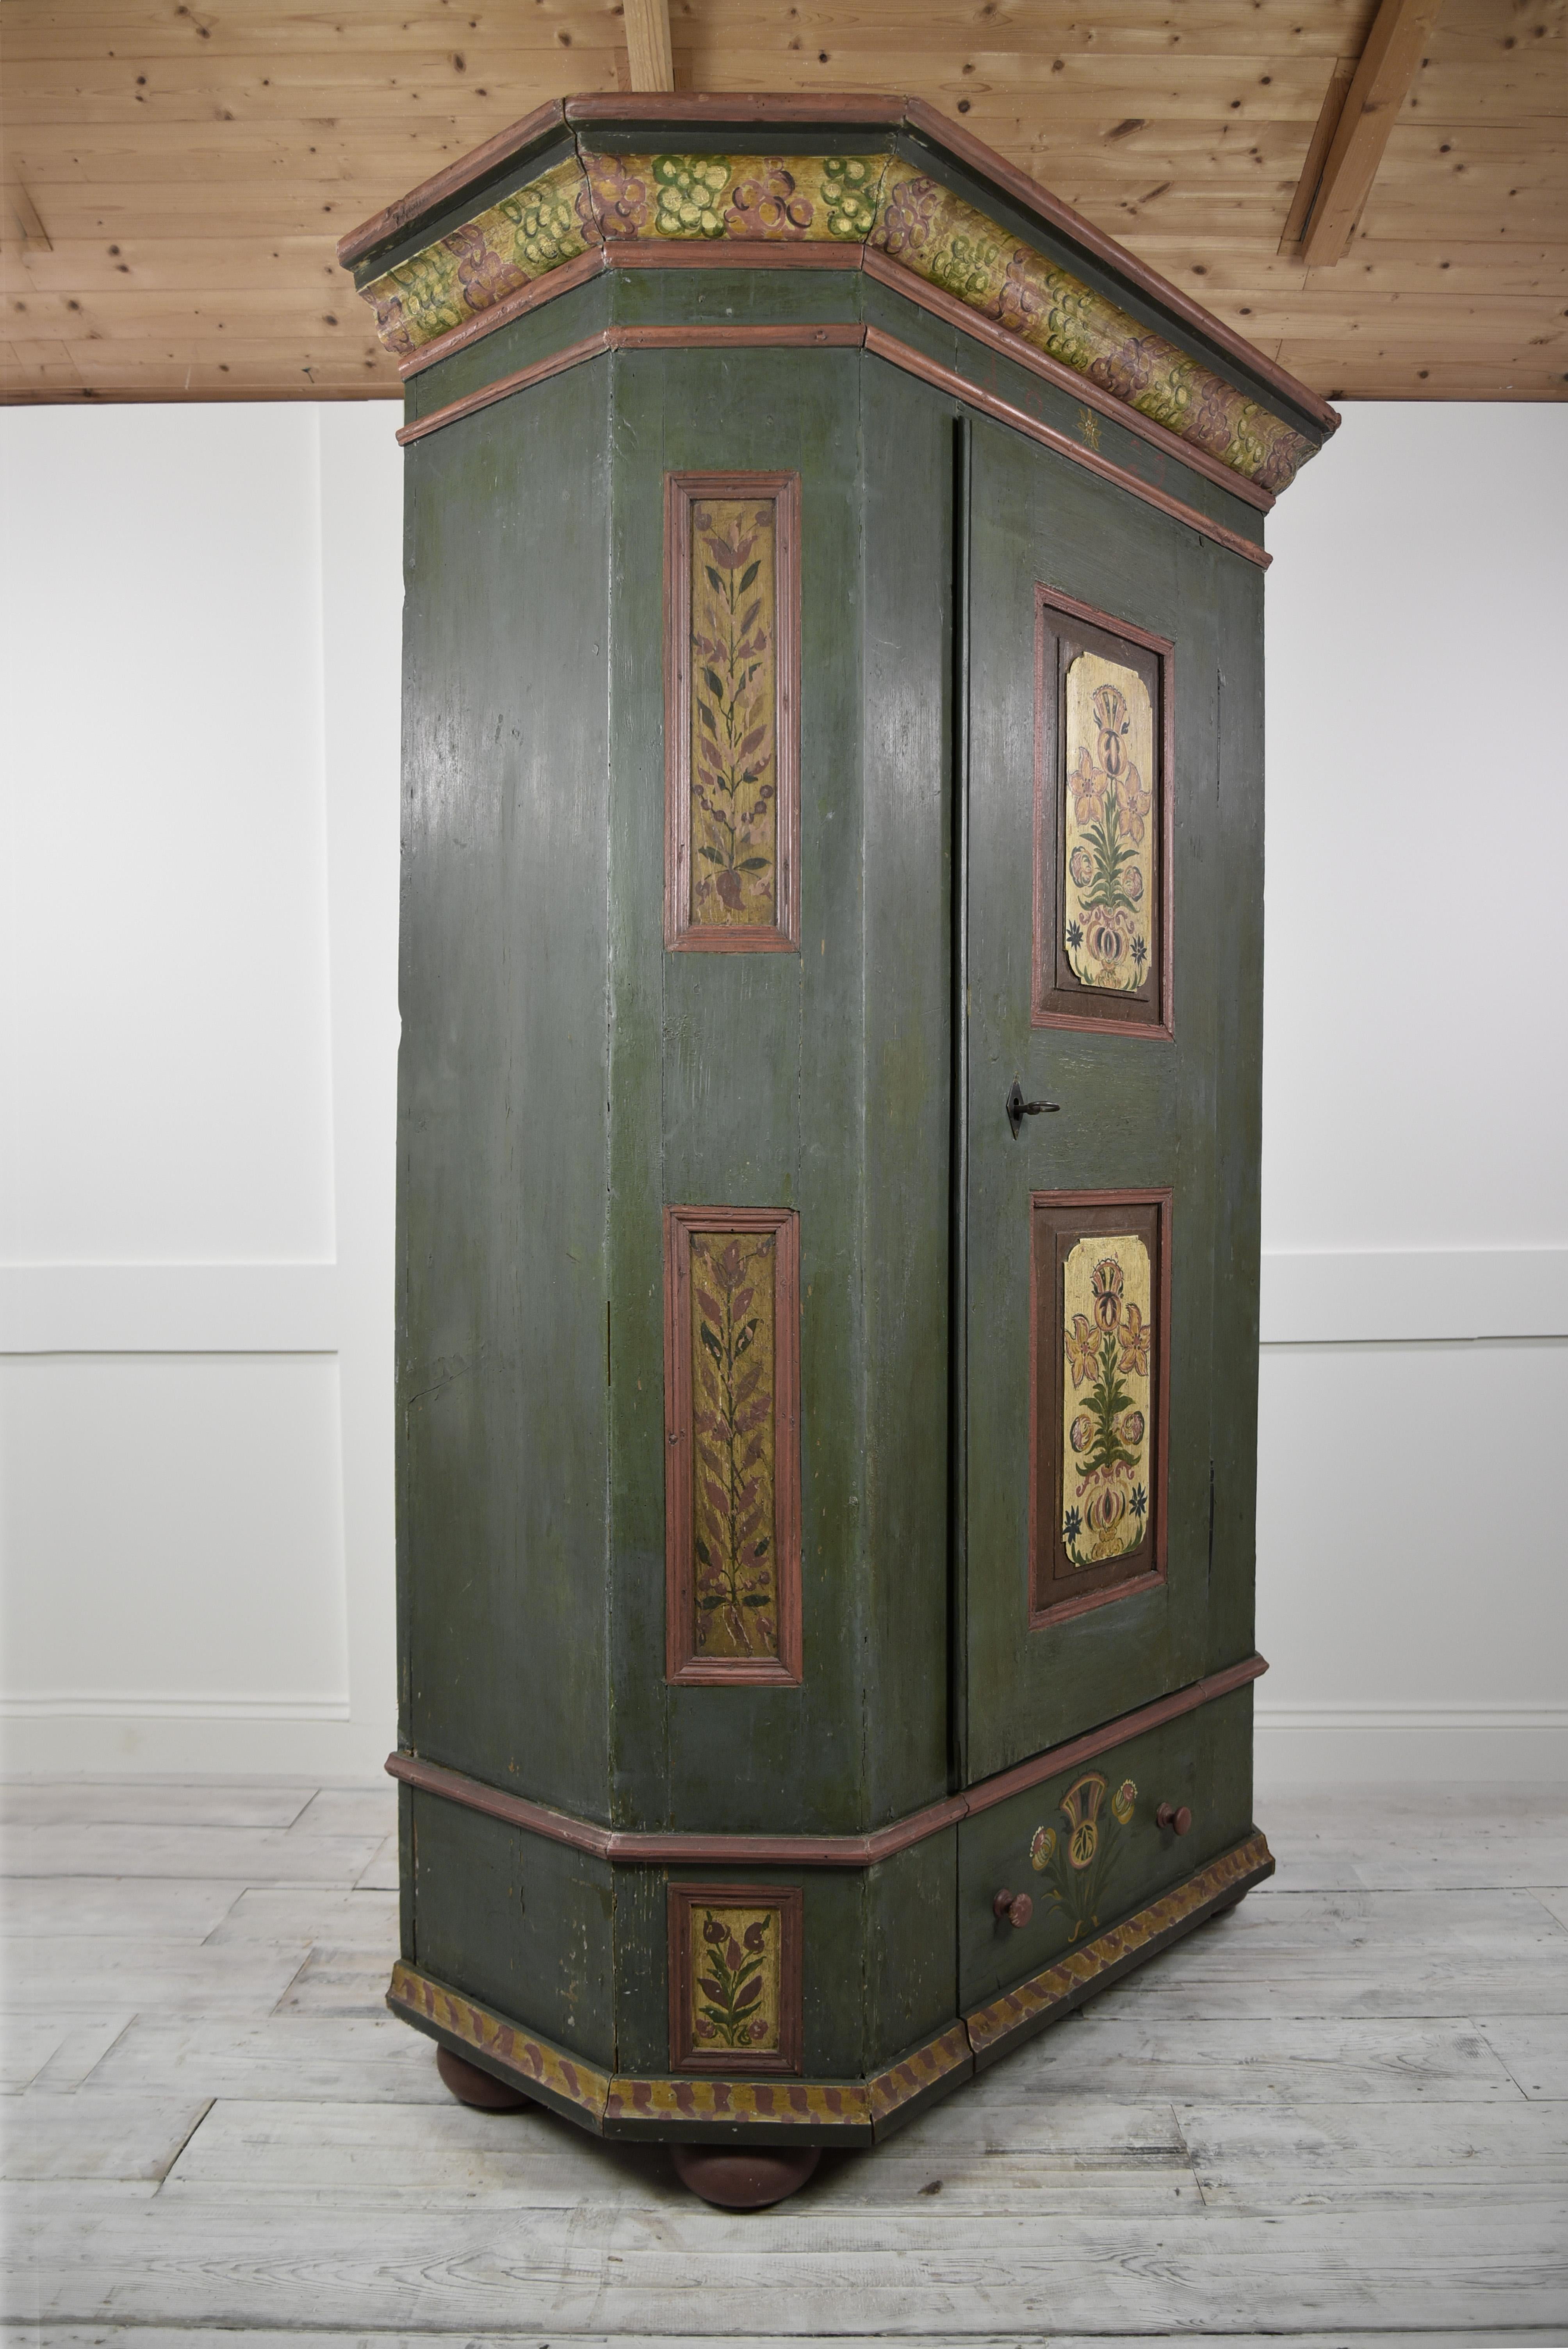 This Tyrolean marriage dowry wardrobe is most likely crafted by a local cabinet maker and painted by a local painter. These beautiful Armoires were made of local Pine wood and reserved to be given as a generous gift to the newly wed young bride, to